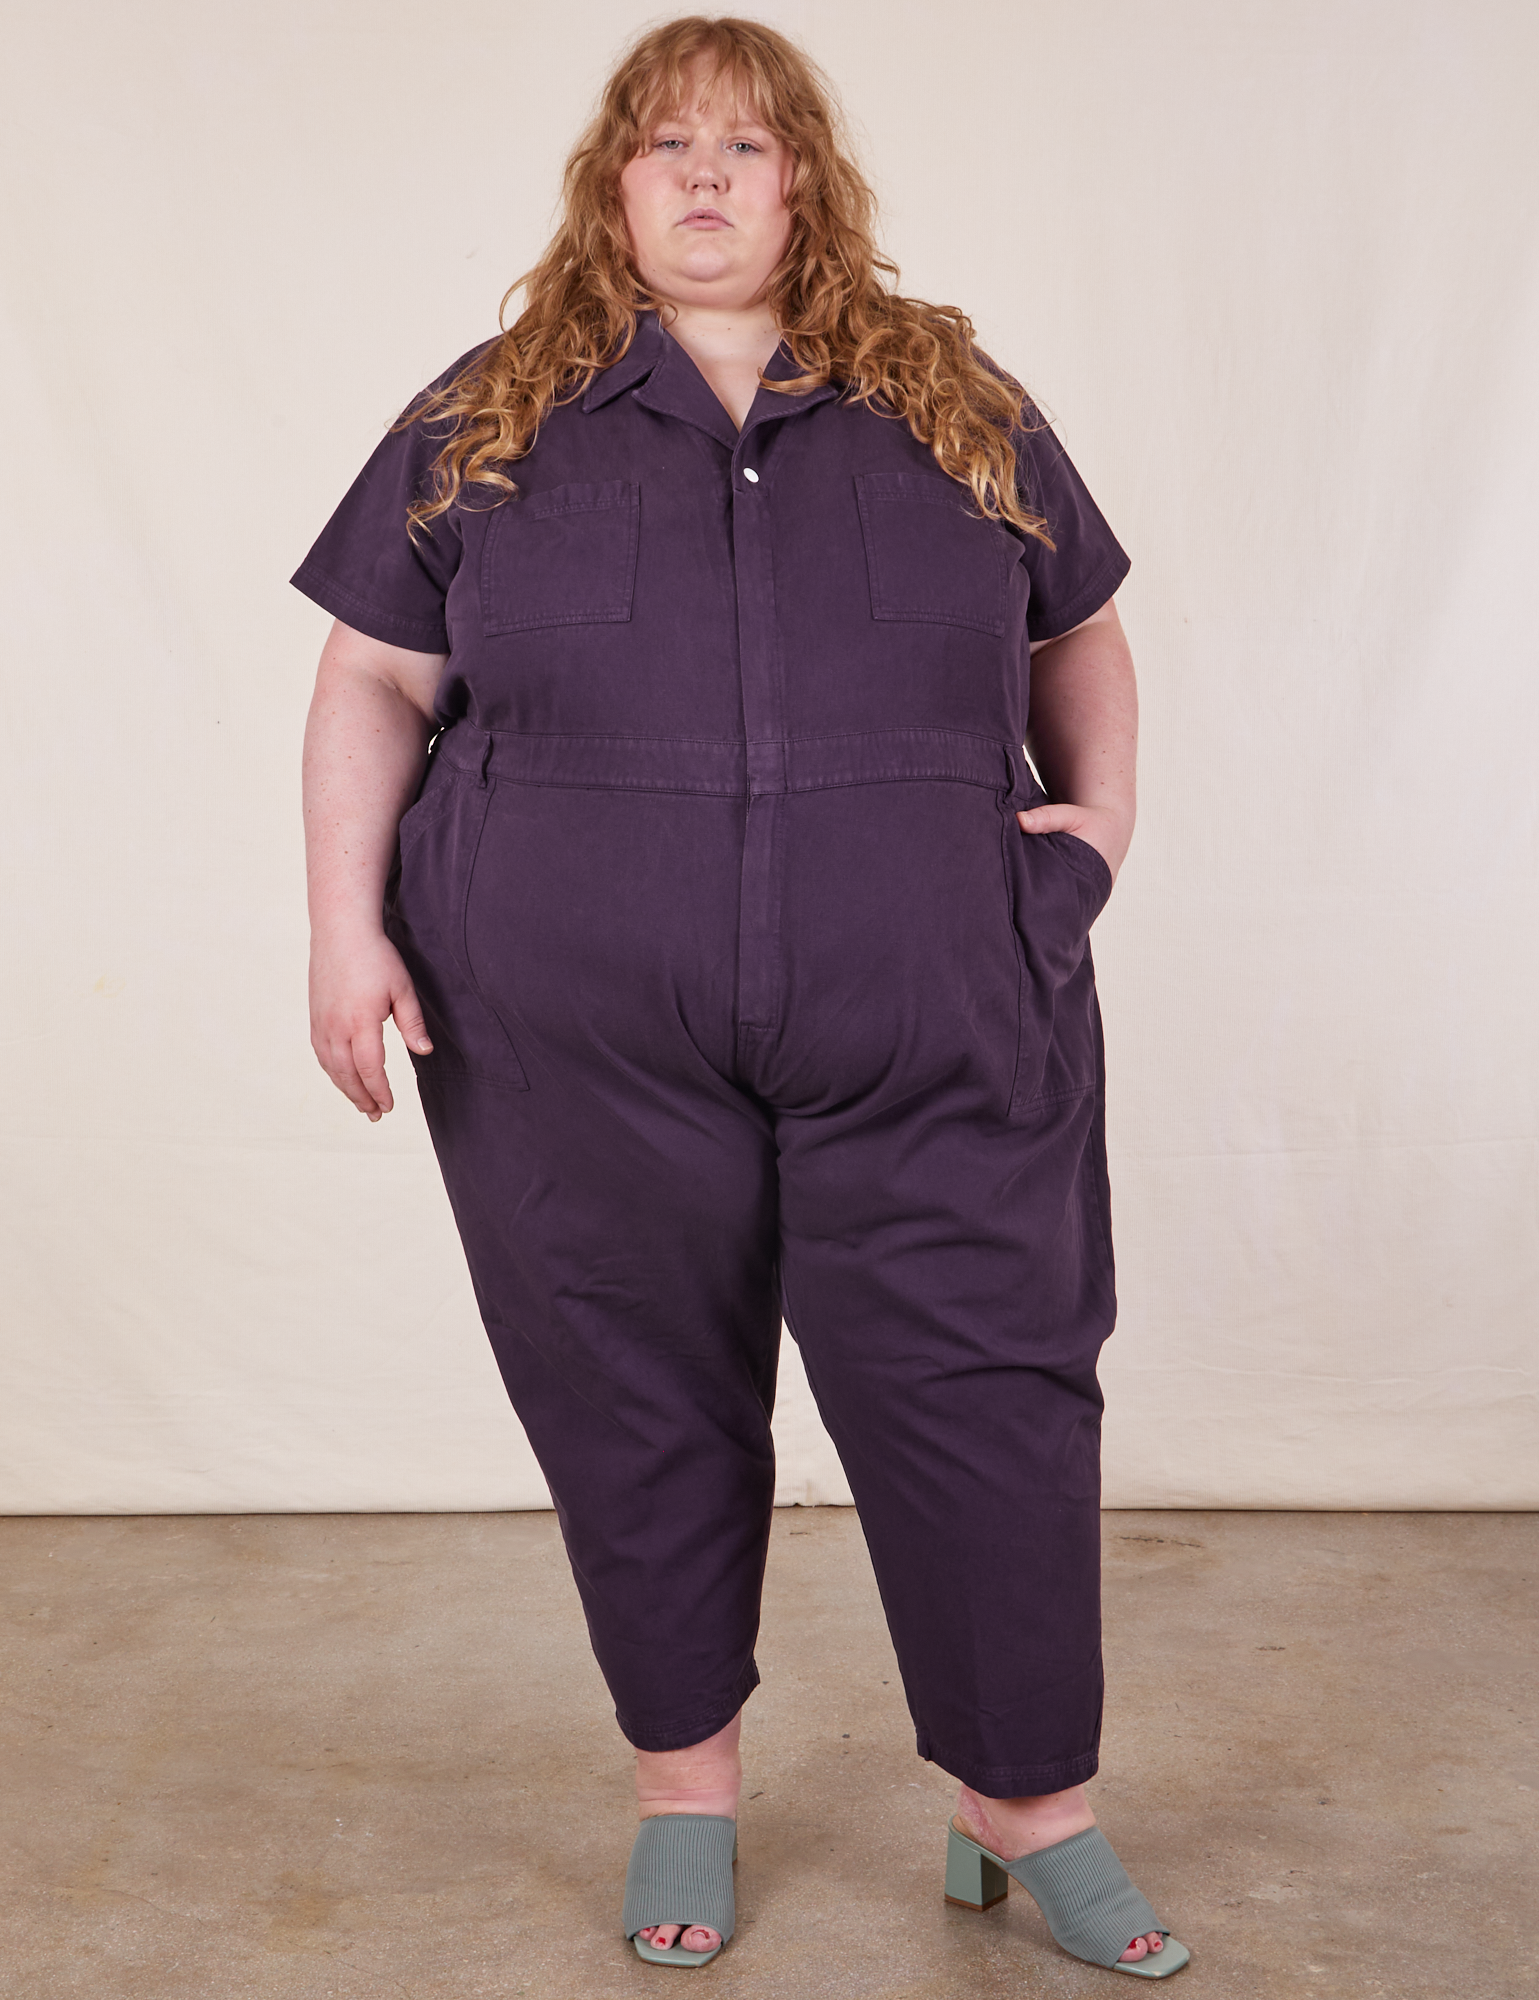 Catie is 5&#39;11&quot; and wearing 5XL Short Sleeve Jumpsuit in Nebula Purple